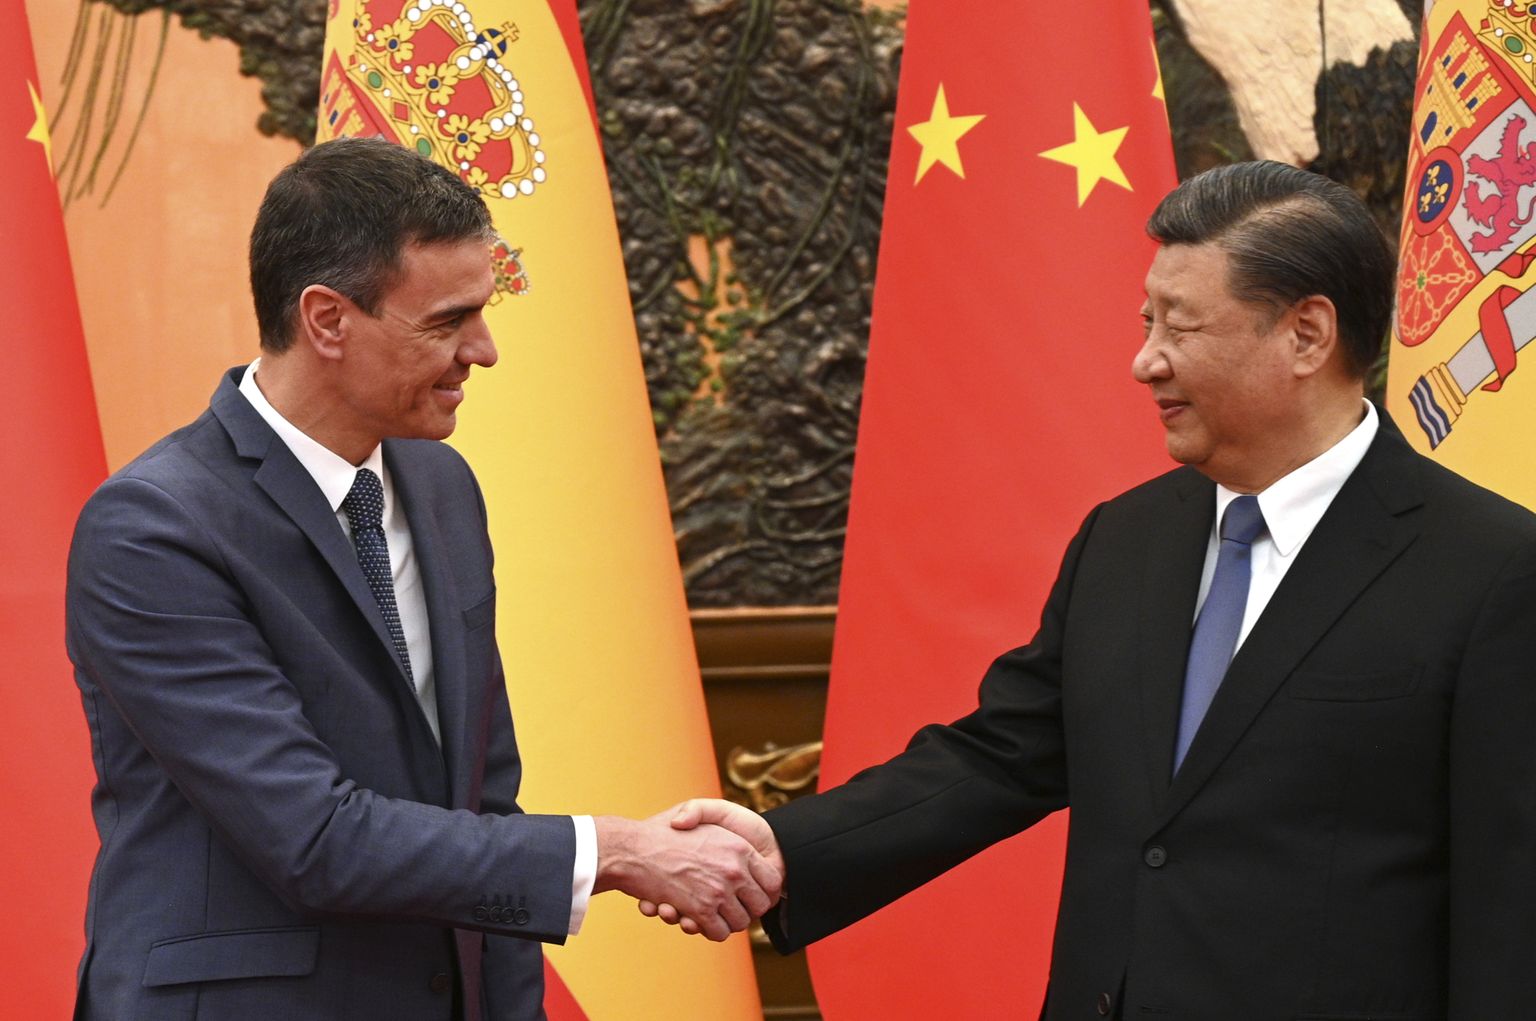 Spanish Prime Minister Pedro Sanchez and Chinese dictator Xi Jinping